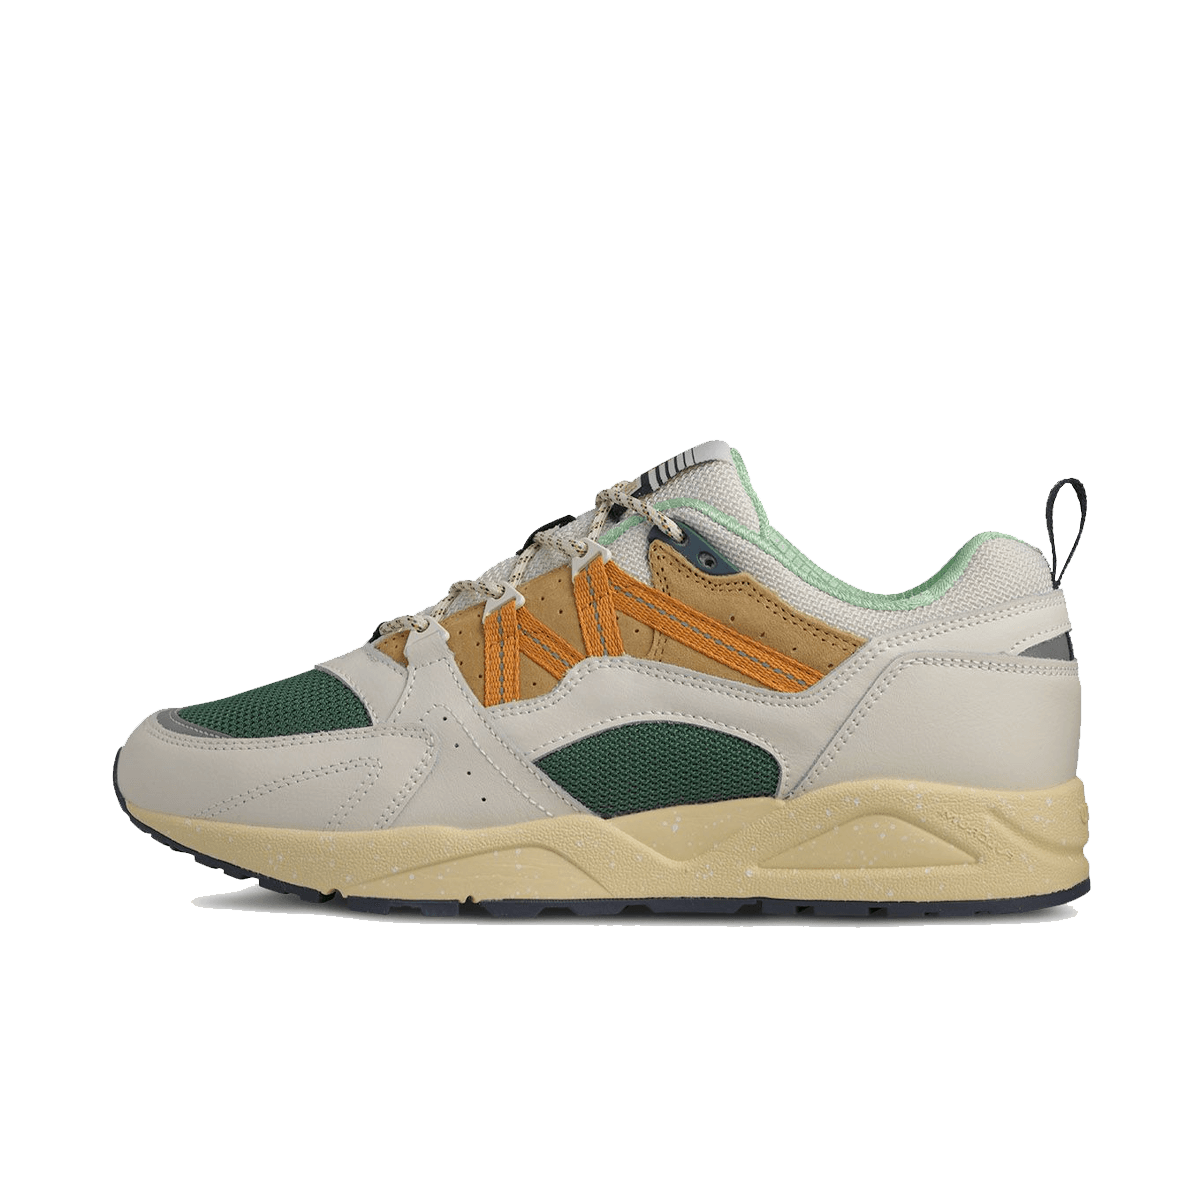 Karhu Fusion 2.0 'Lily White' - The Forest Rules F804144